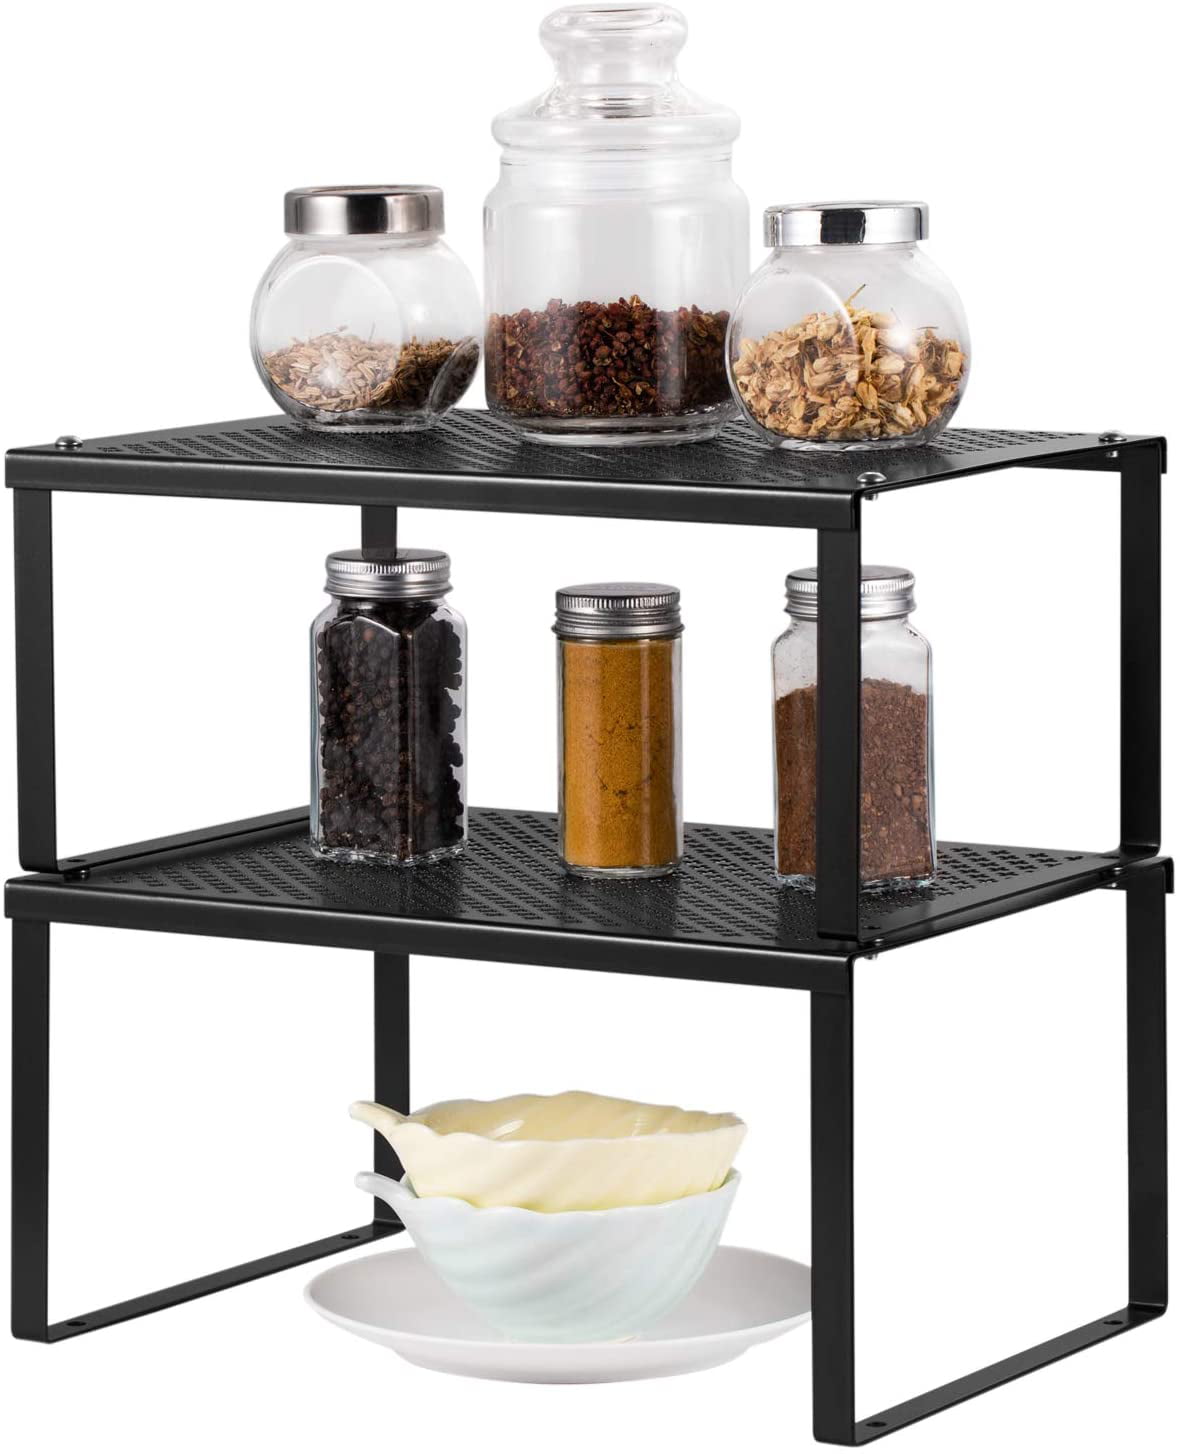 12 7 Kitchen Cabinet And Counter Shelf, Stackable Cabinet Shelves